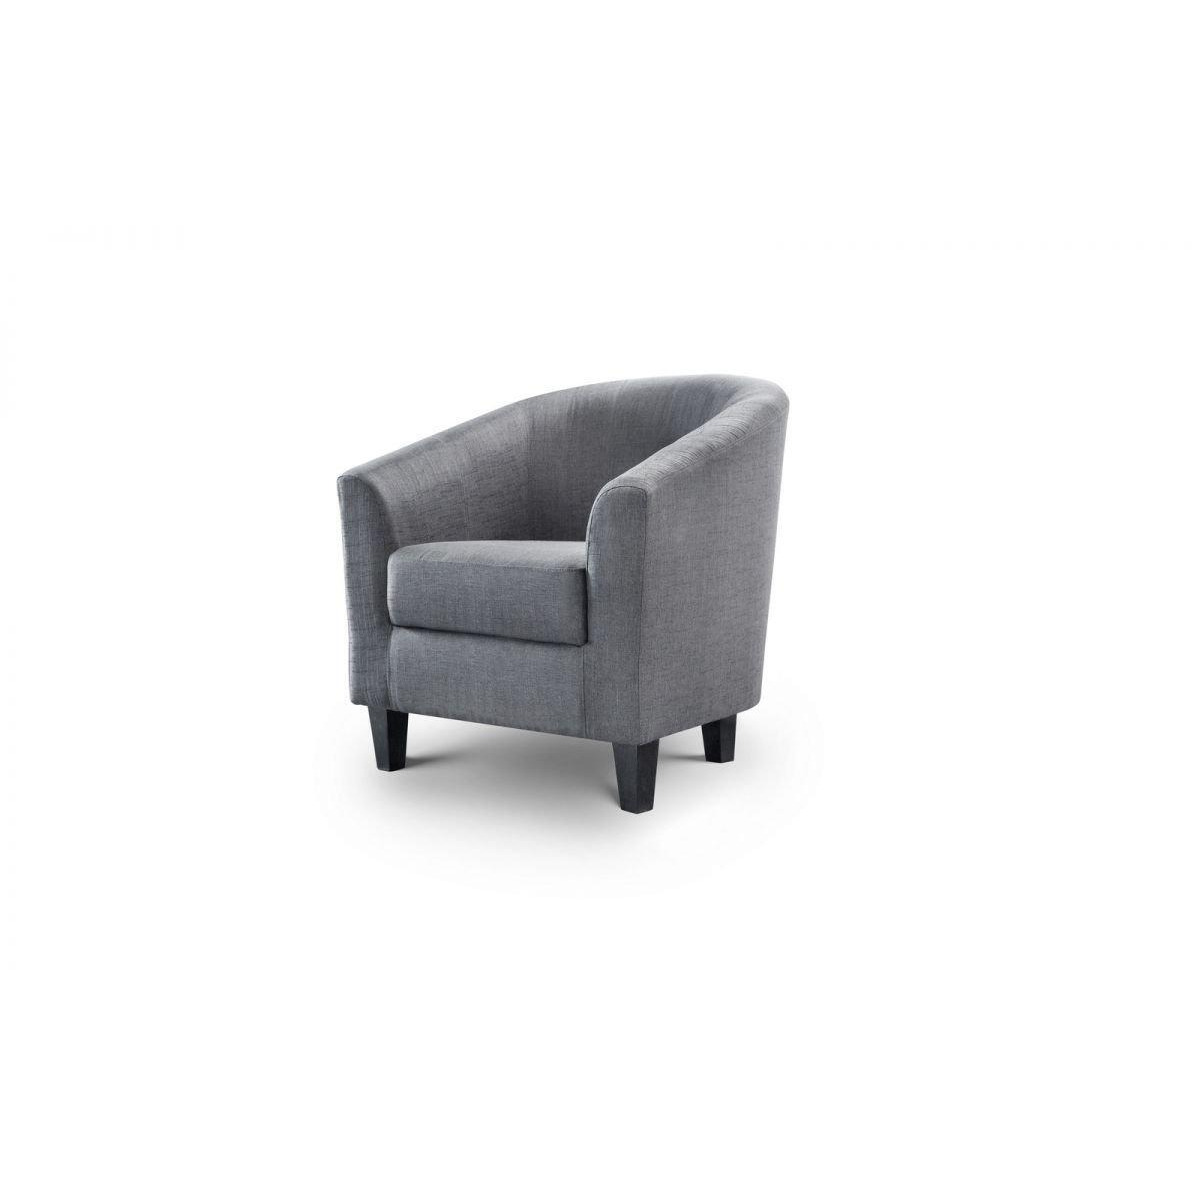 Tub Chair in Slate Grey Linen - image 1